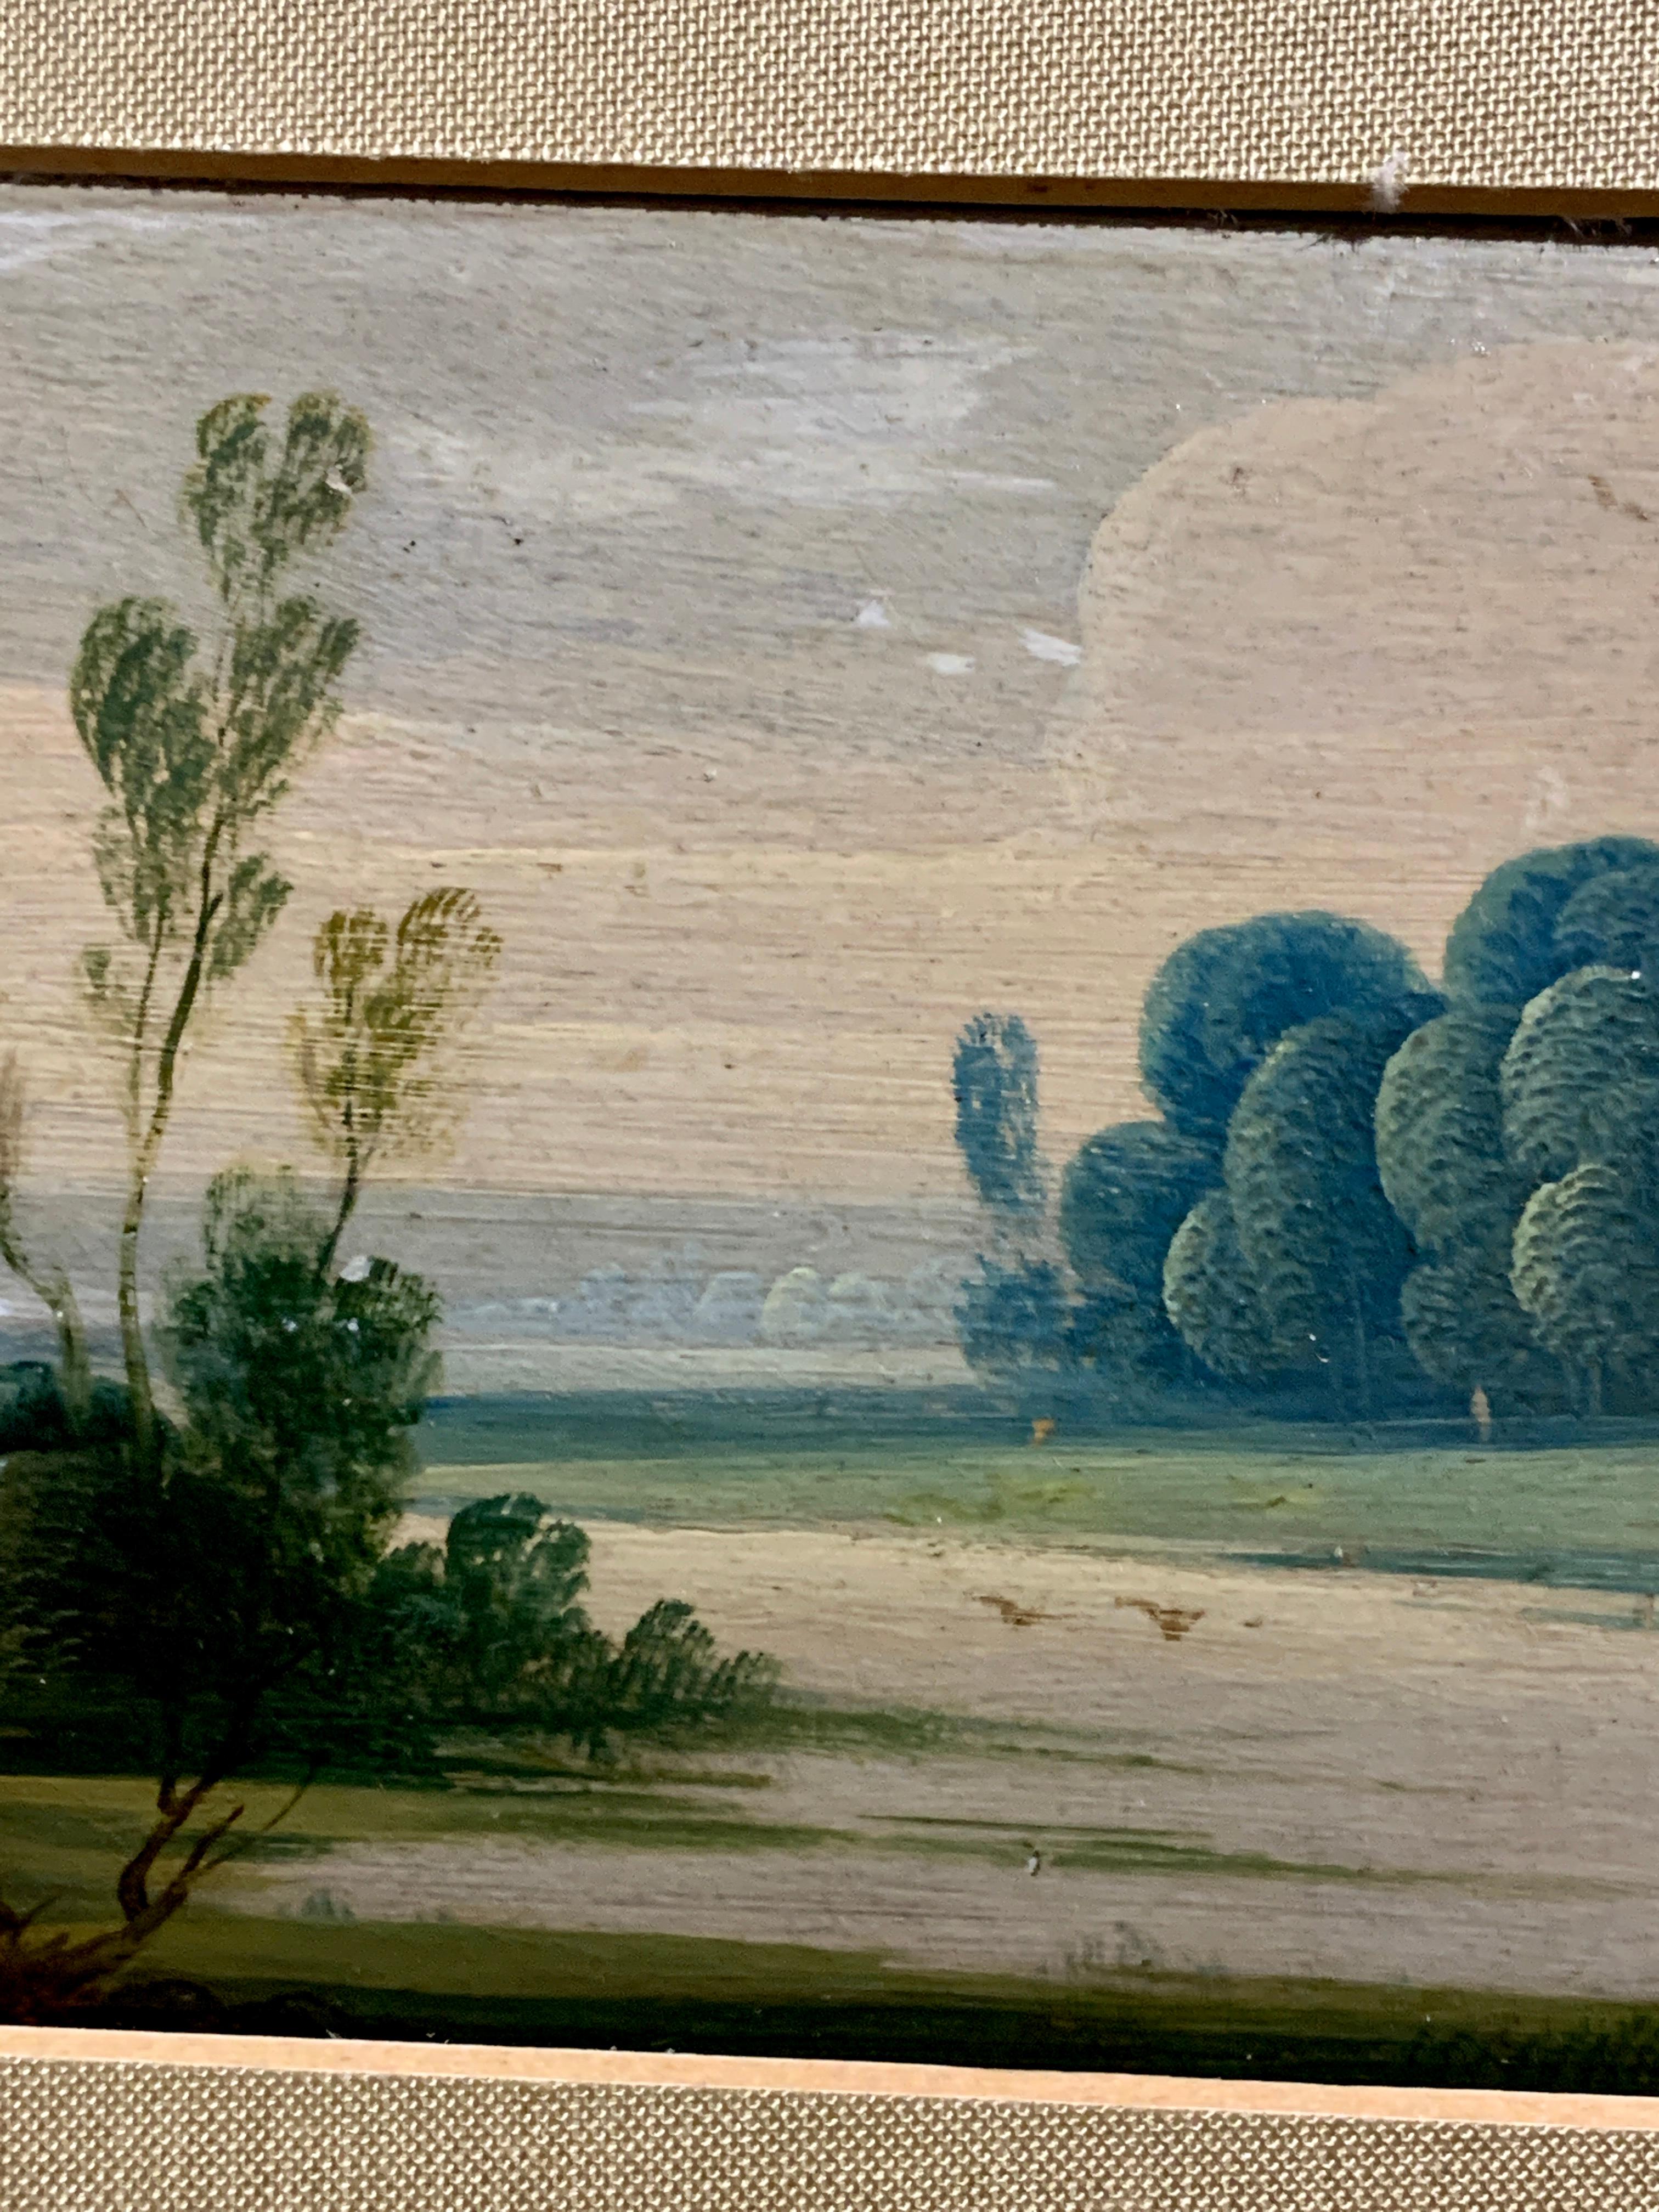 Wonderful pair of Flemish or Dutch old master style landscapes with figures.

Possibly taken from a cabinet or piece of furniture this pair of paintings are very decorative and typical of the Flemish school from the 17th  and 18th